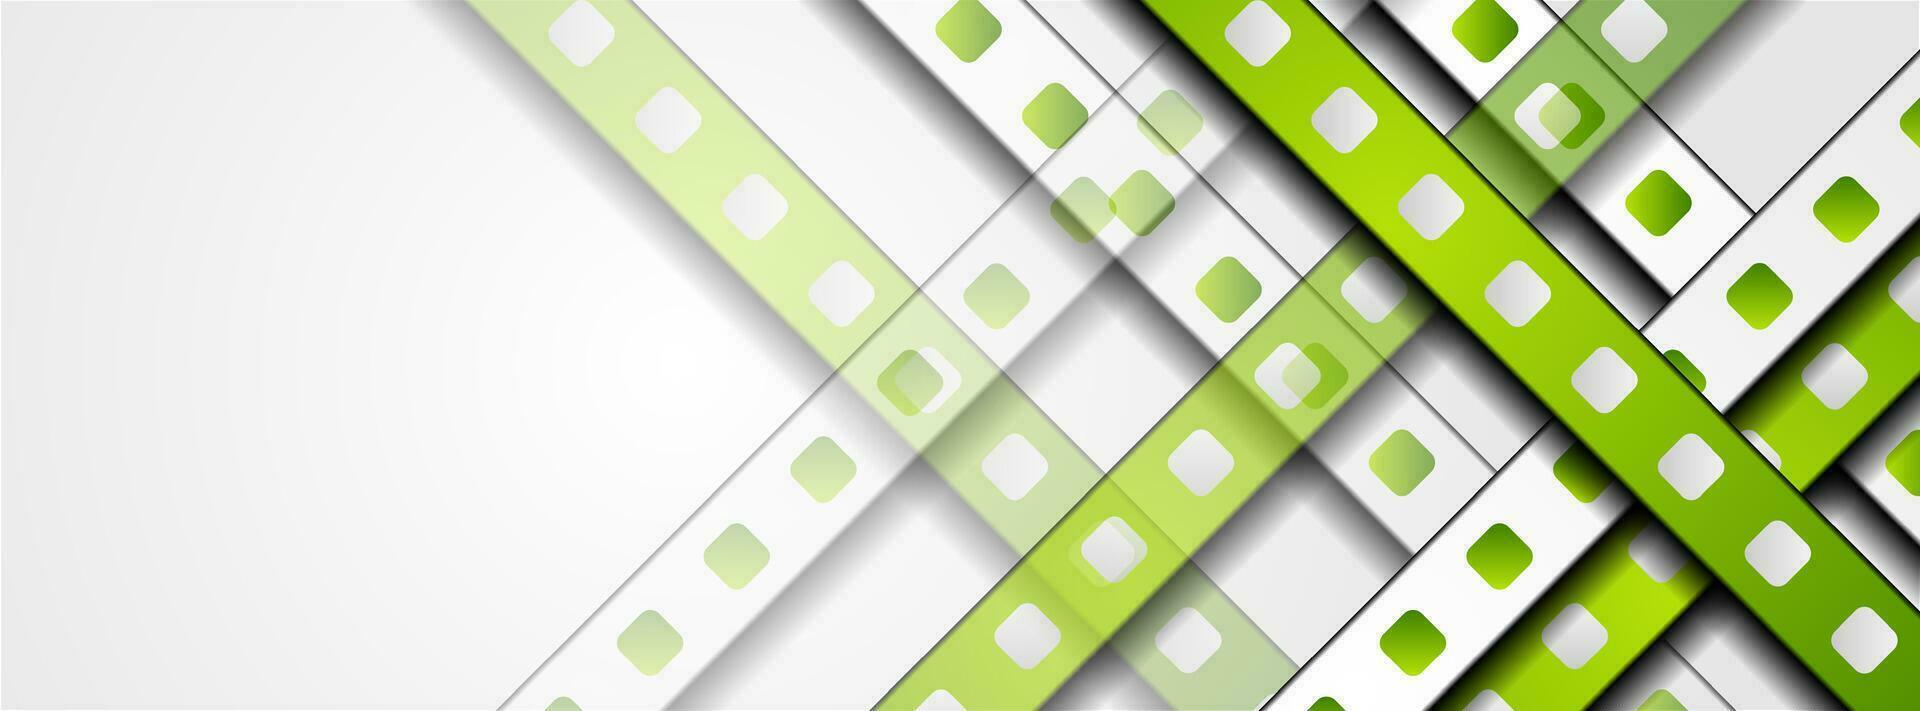 Green and grey stripes abstract tech background vector